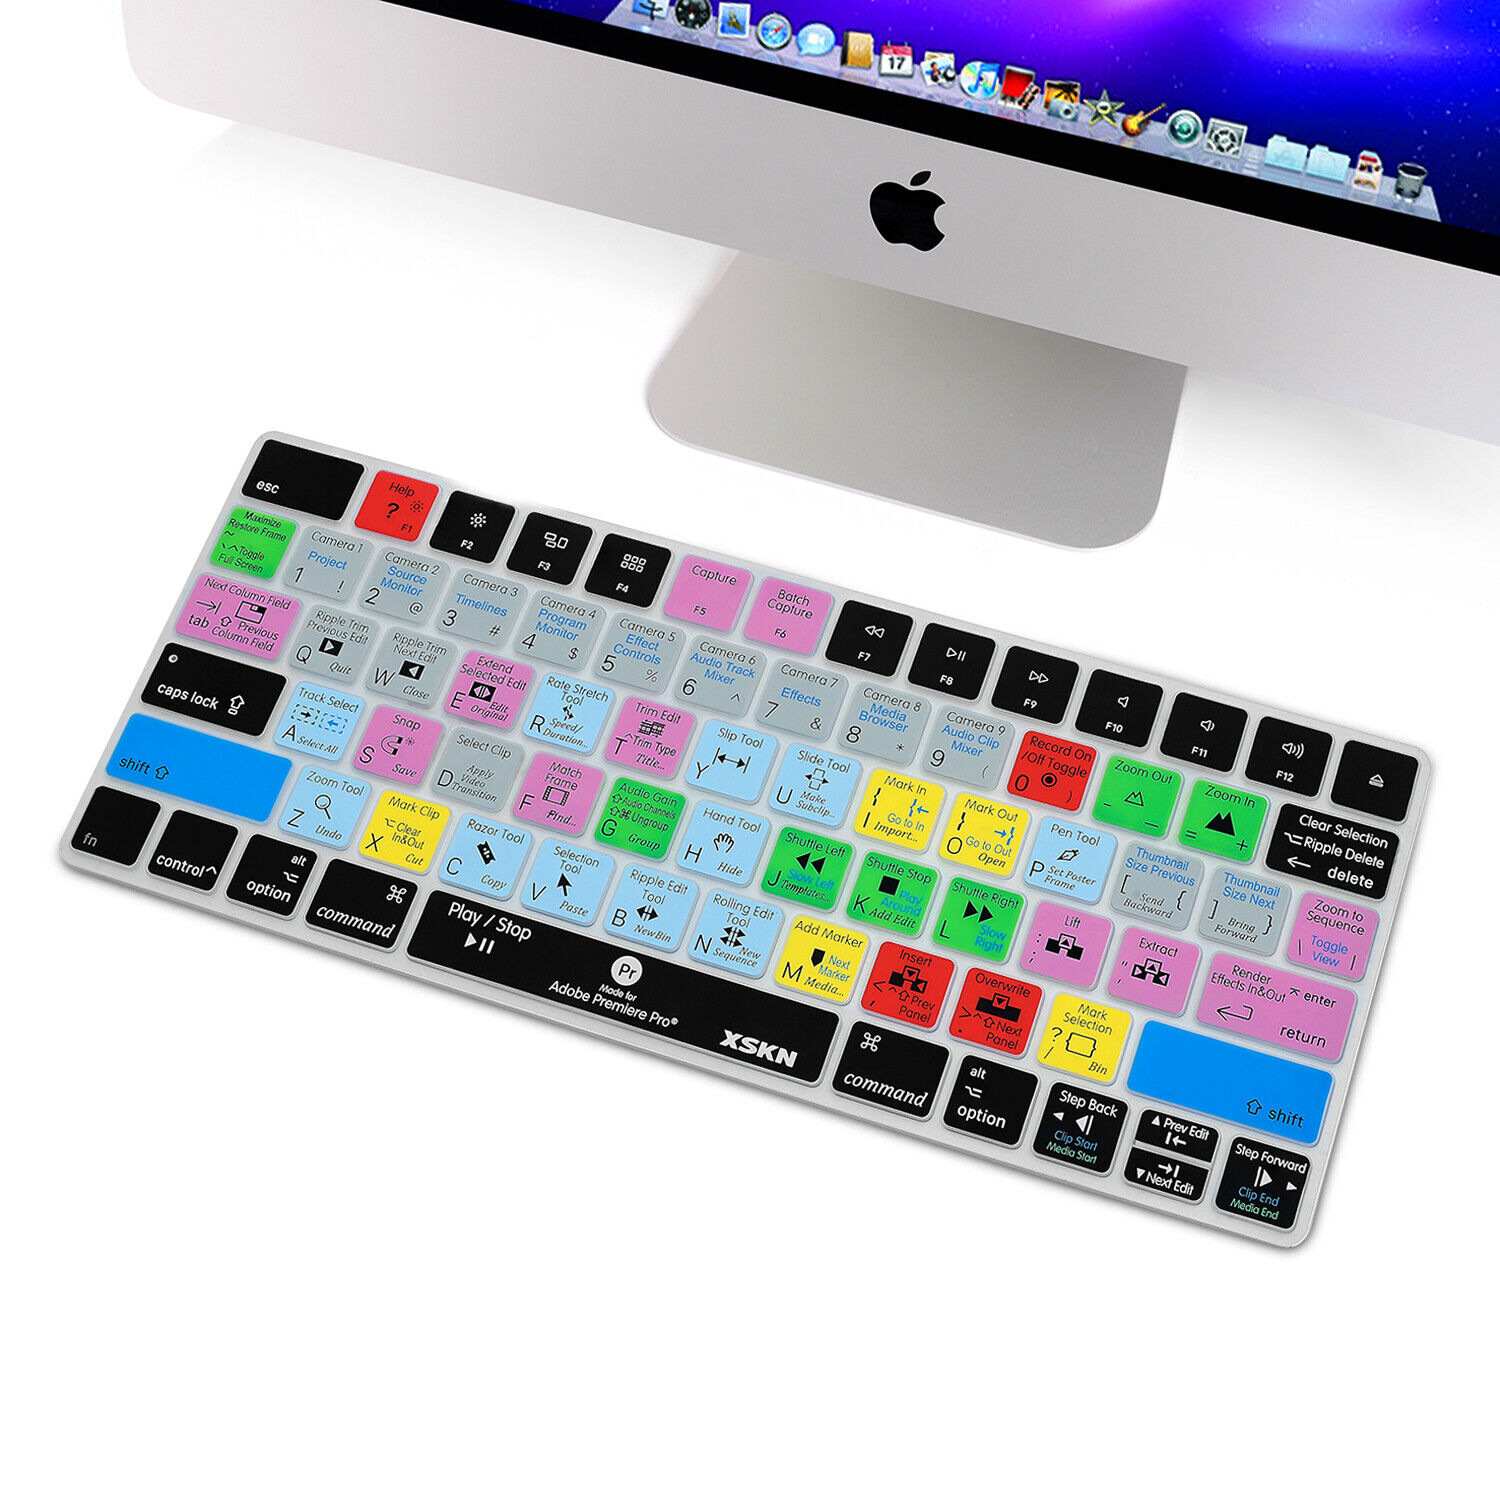 XSKN Premiere Pro Shortcut Features Keyboard Cover Skin for Apple Magic Keyboard